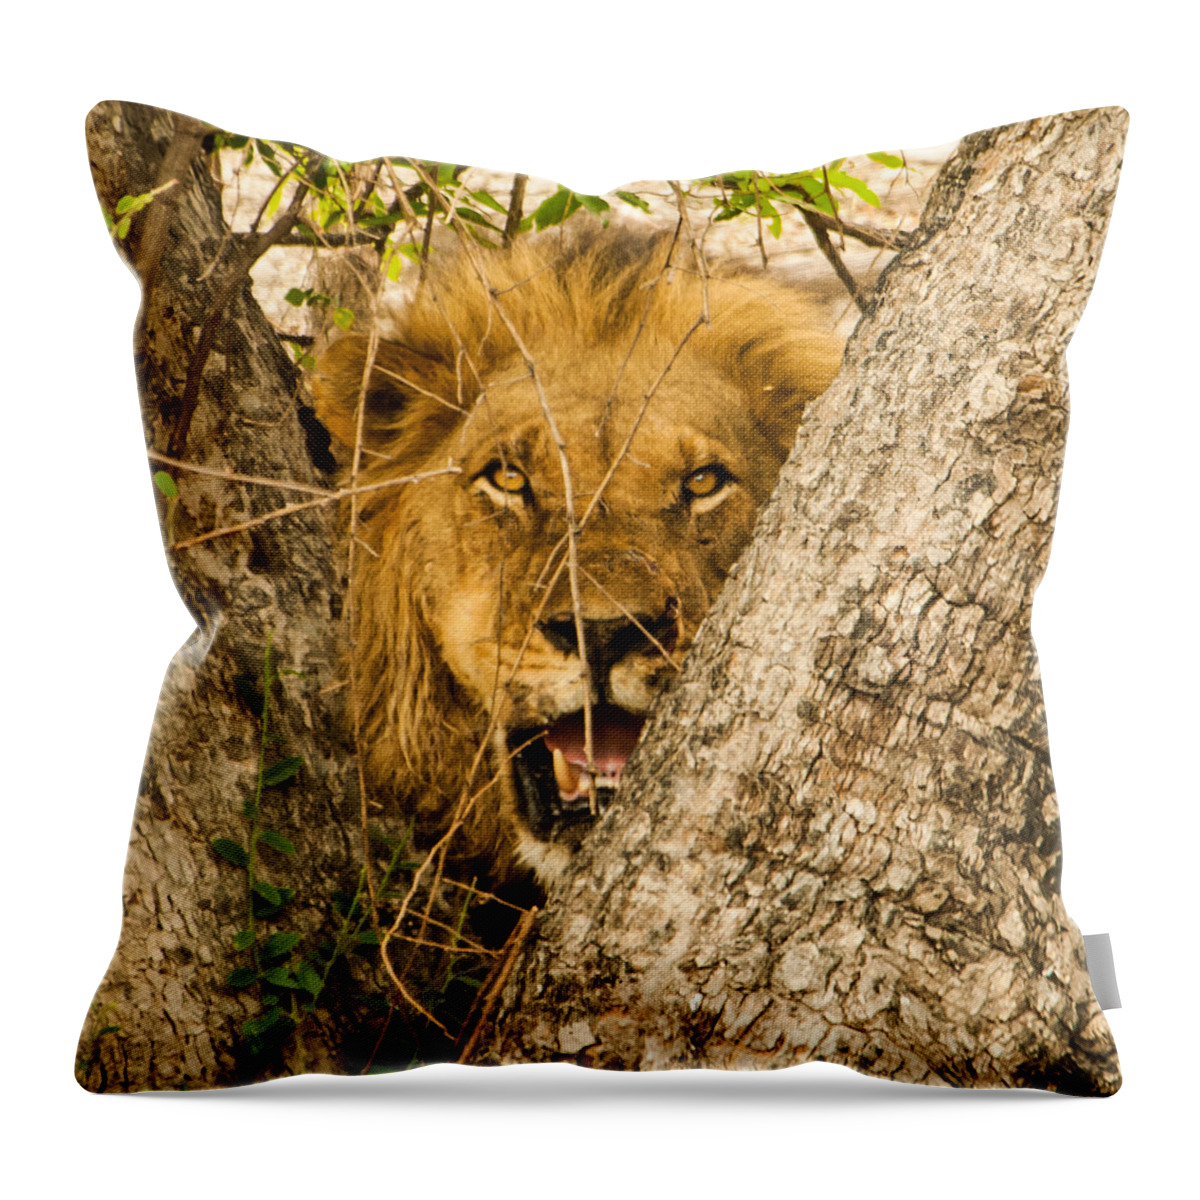 Africa Throw Pillow featuring the photograph You can't see me by Alistair Lyne